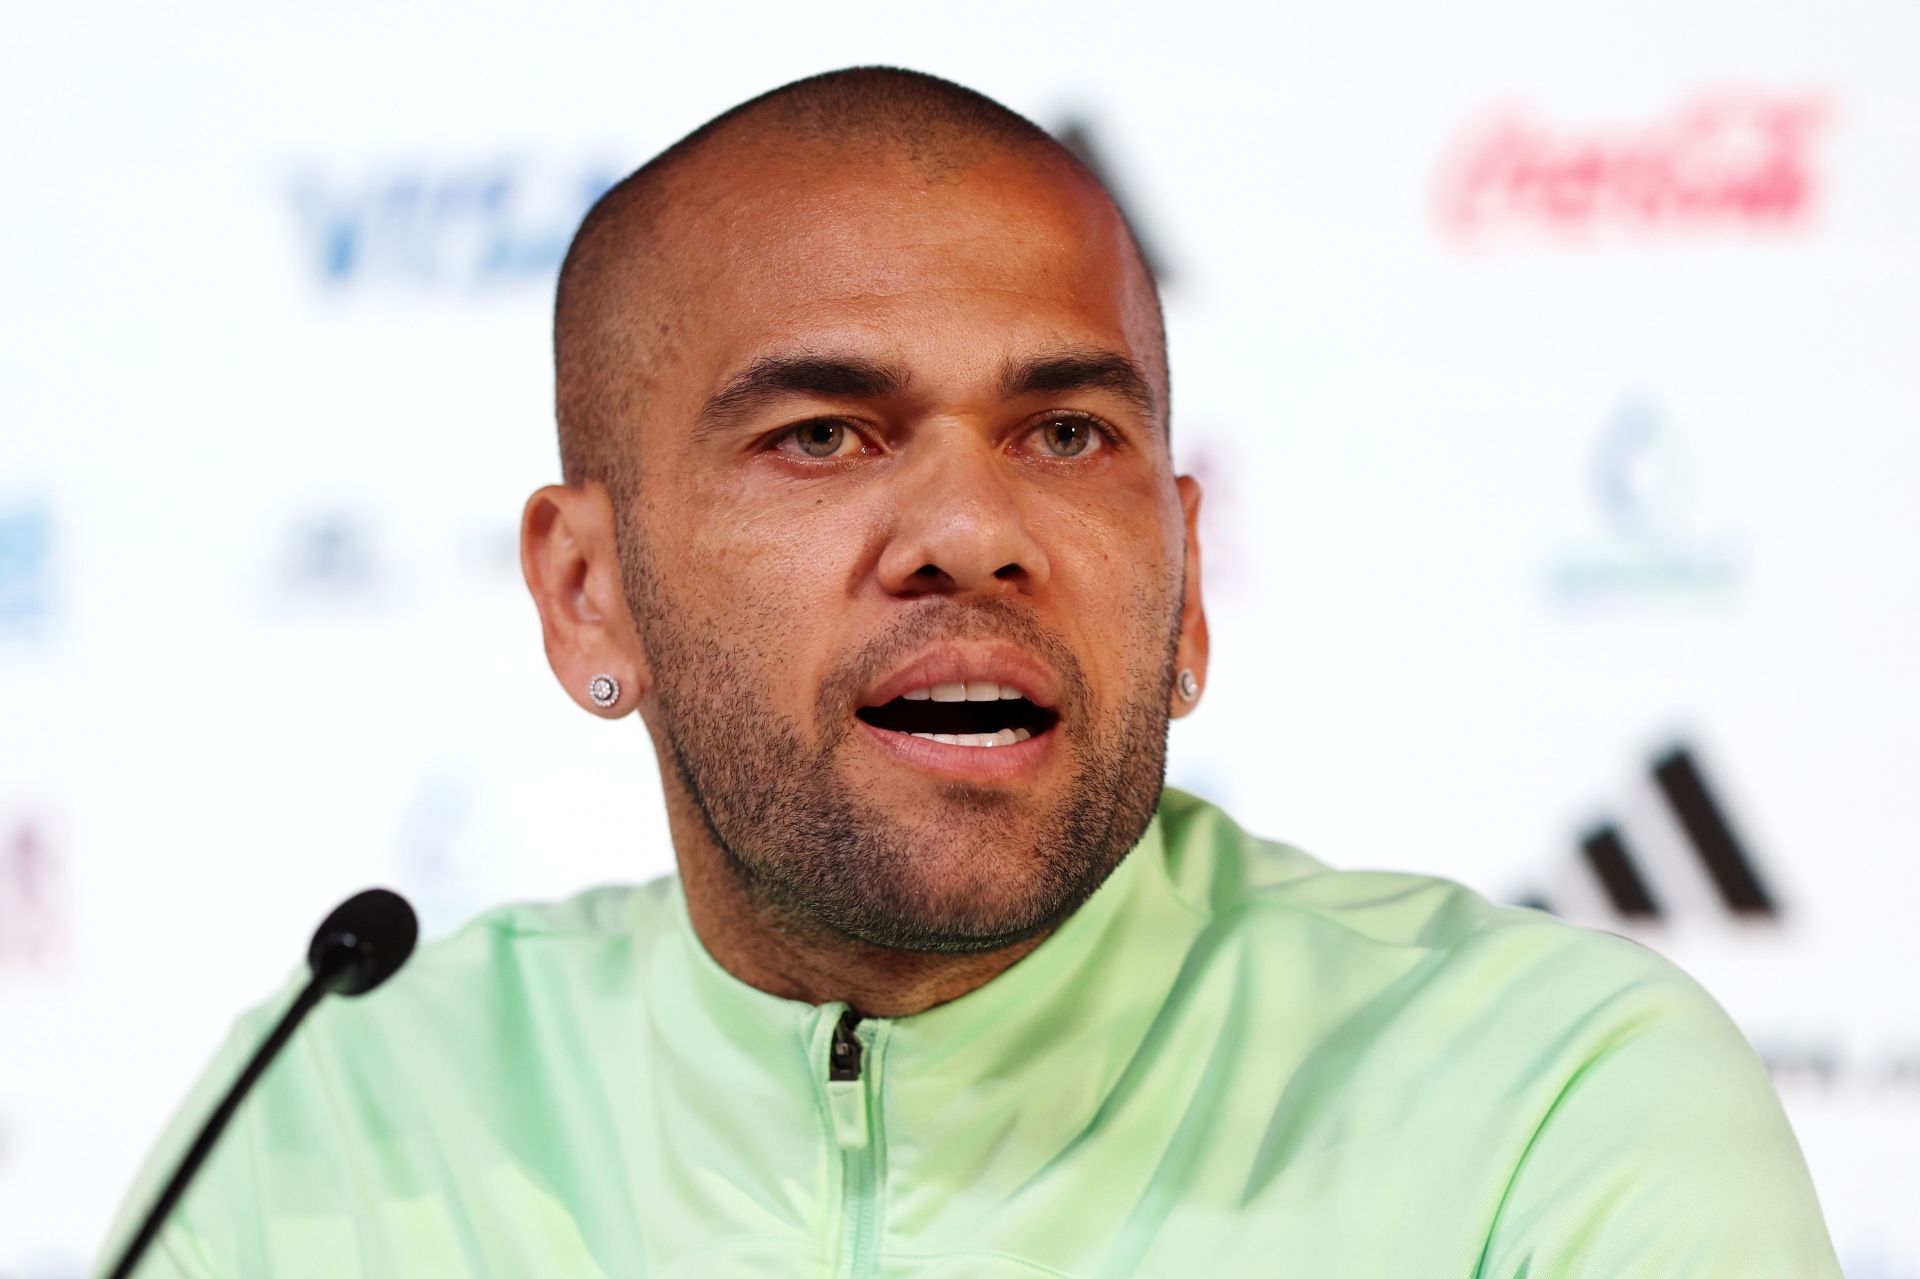 Dani Alves has denied all accusations of sexual assault.